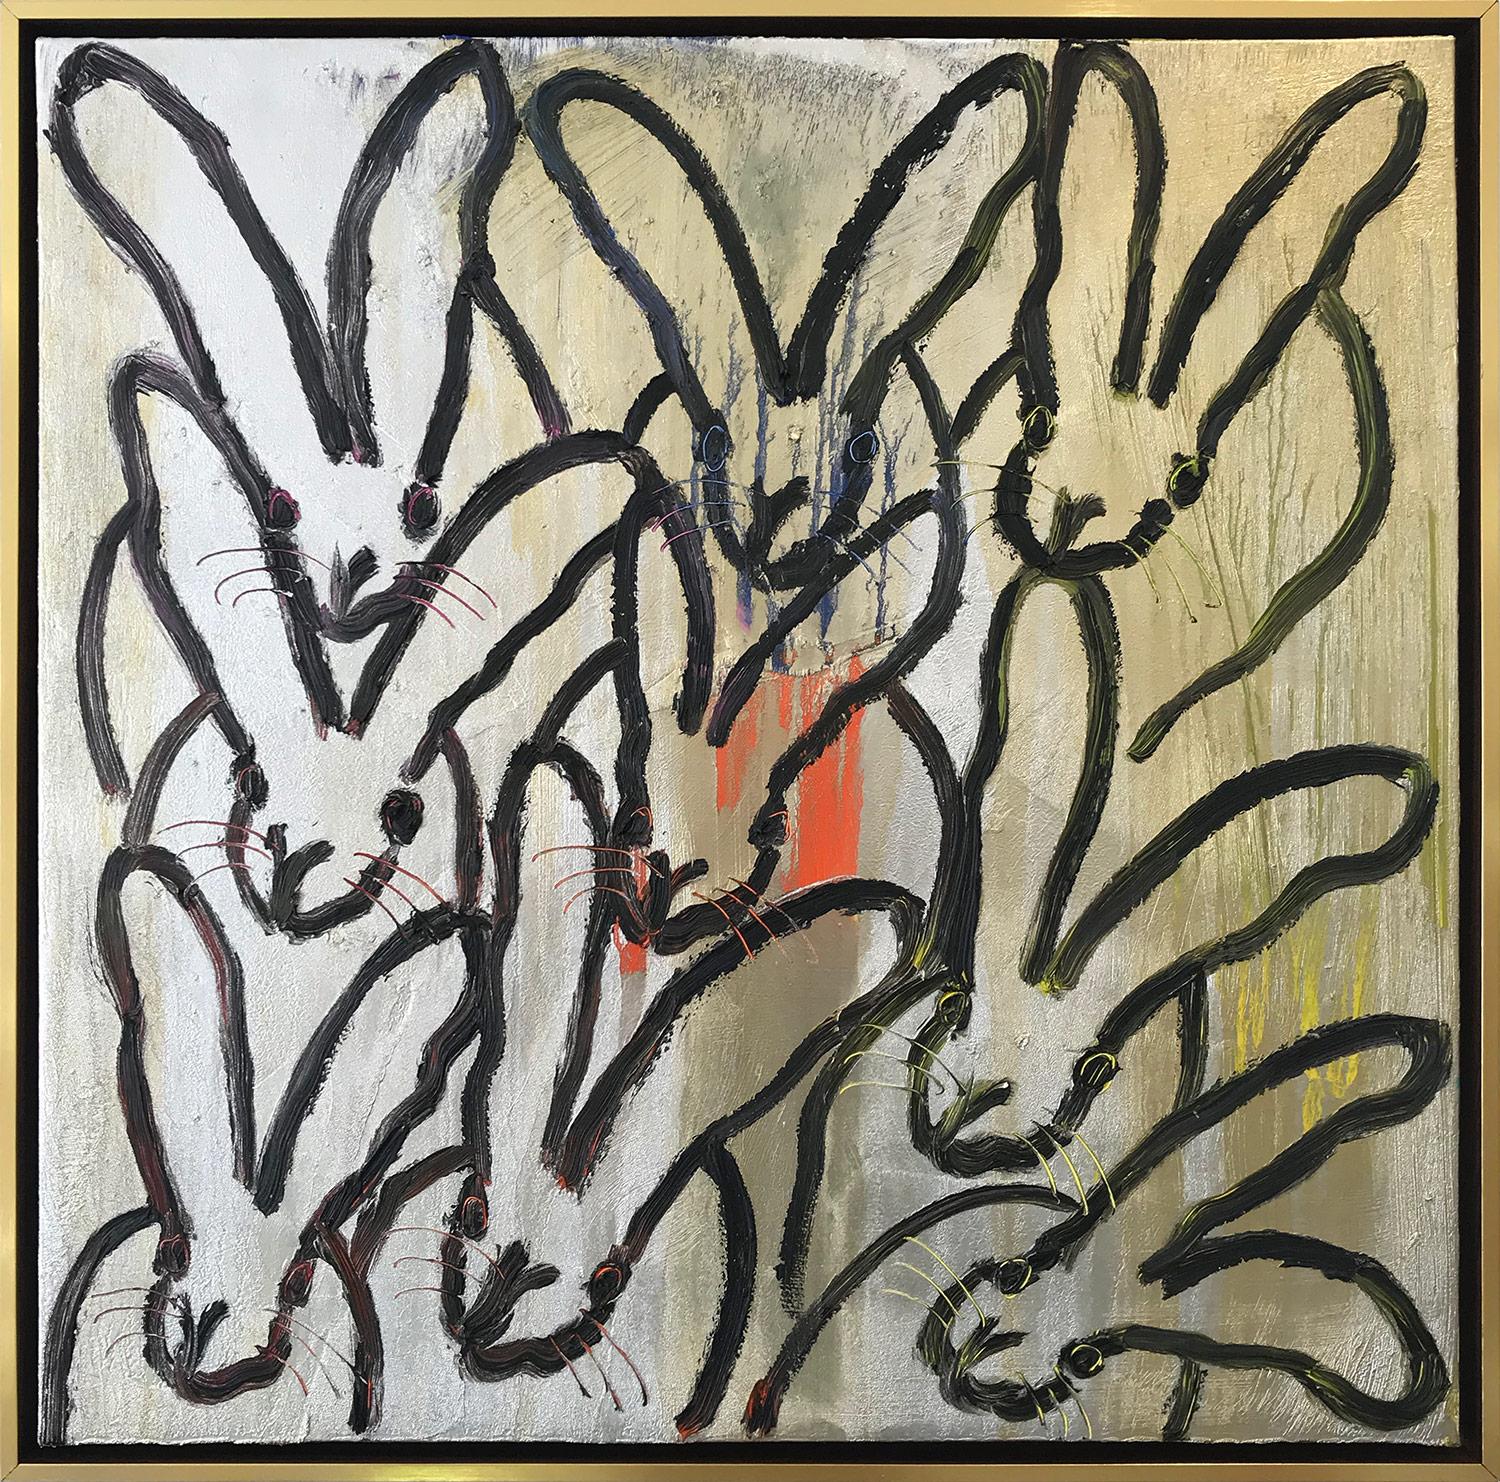 Hunt Slonem Abstract Painting - "Some Orange" (Black Bunnies on Gold Silver Background with Colorful accents)